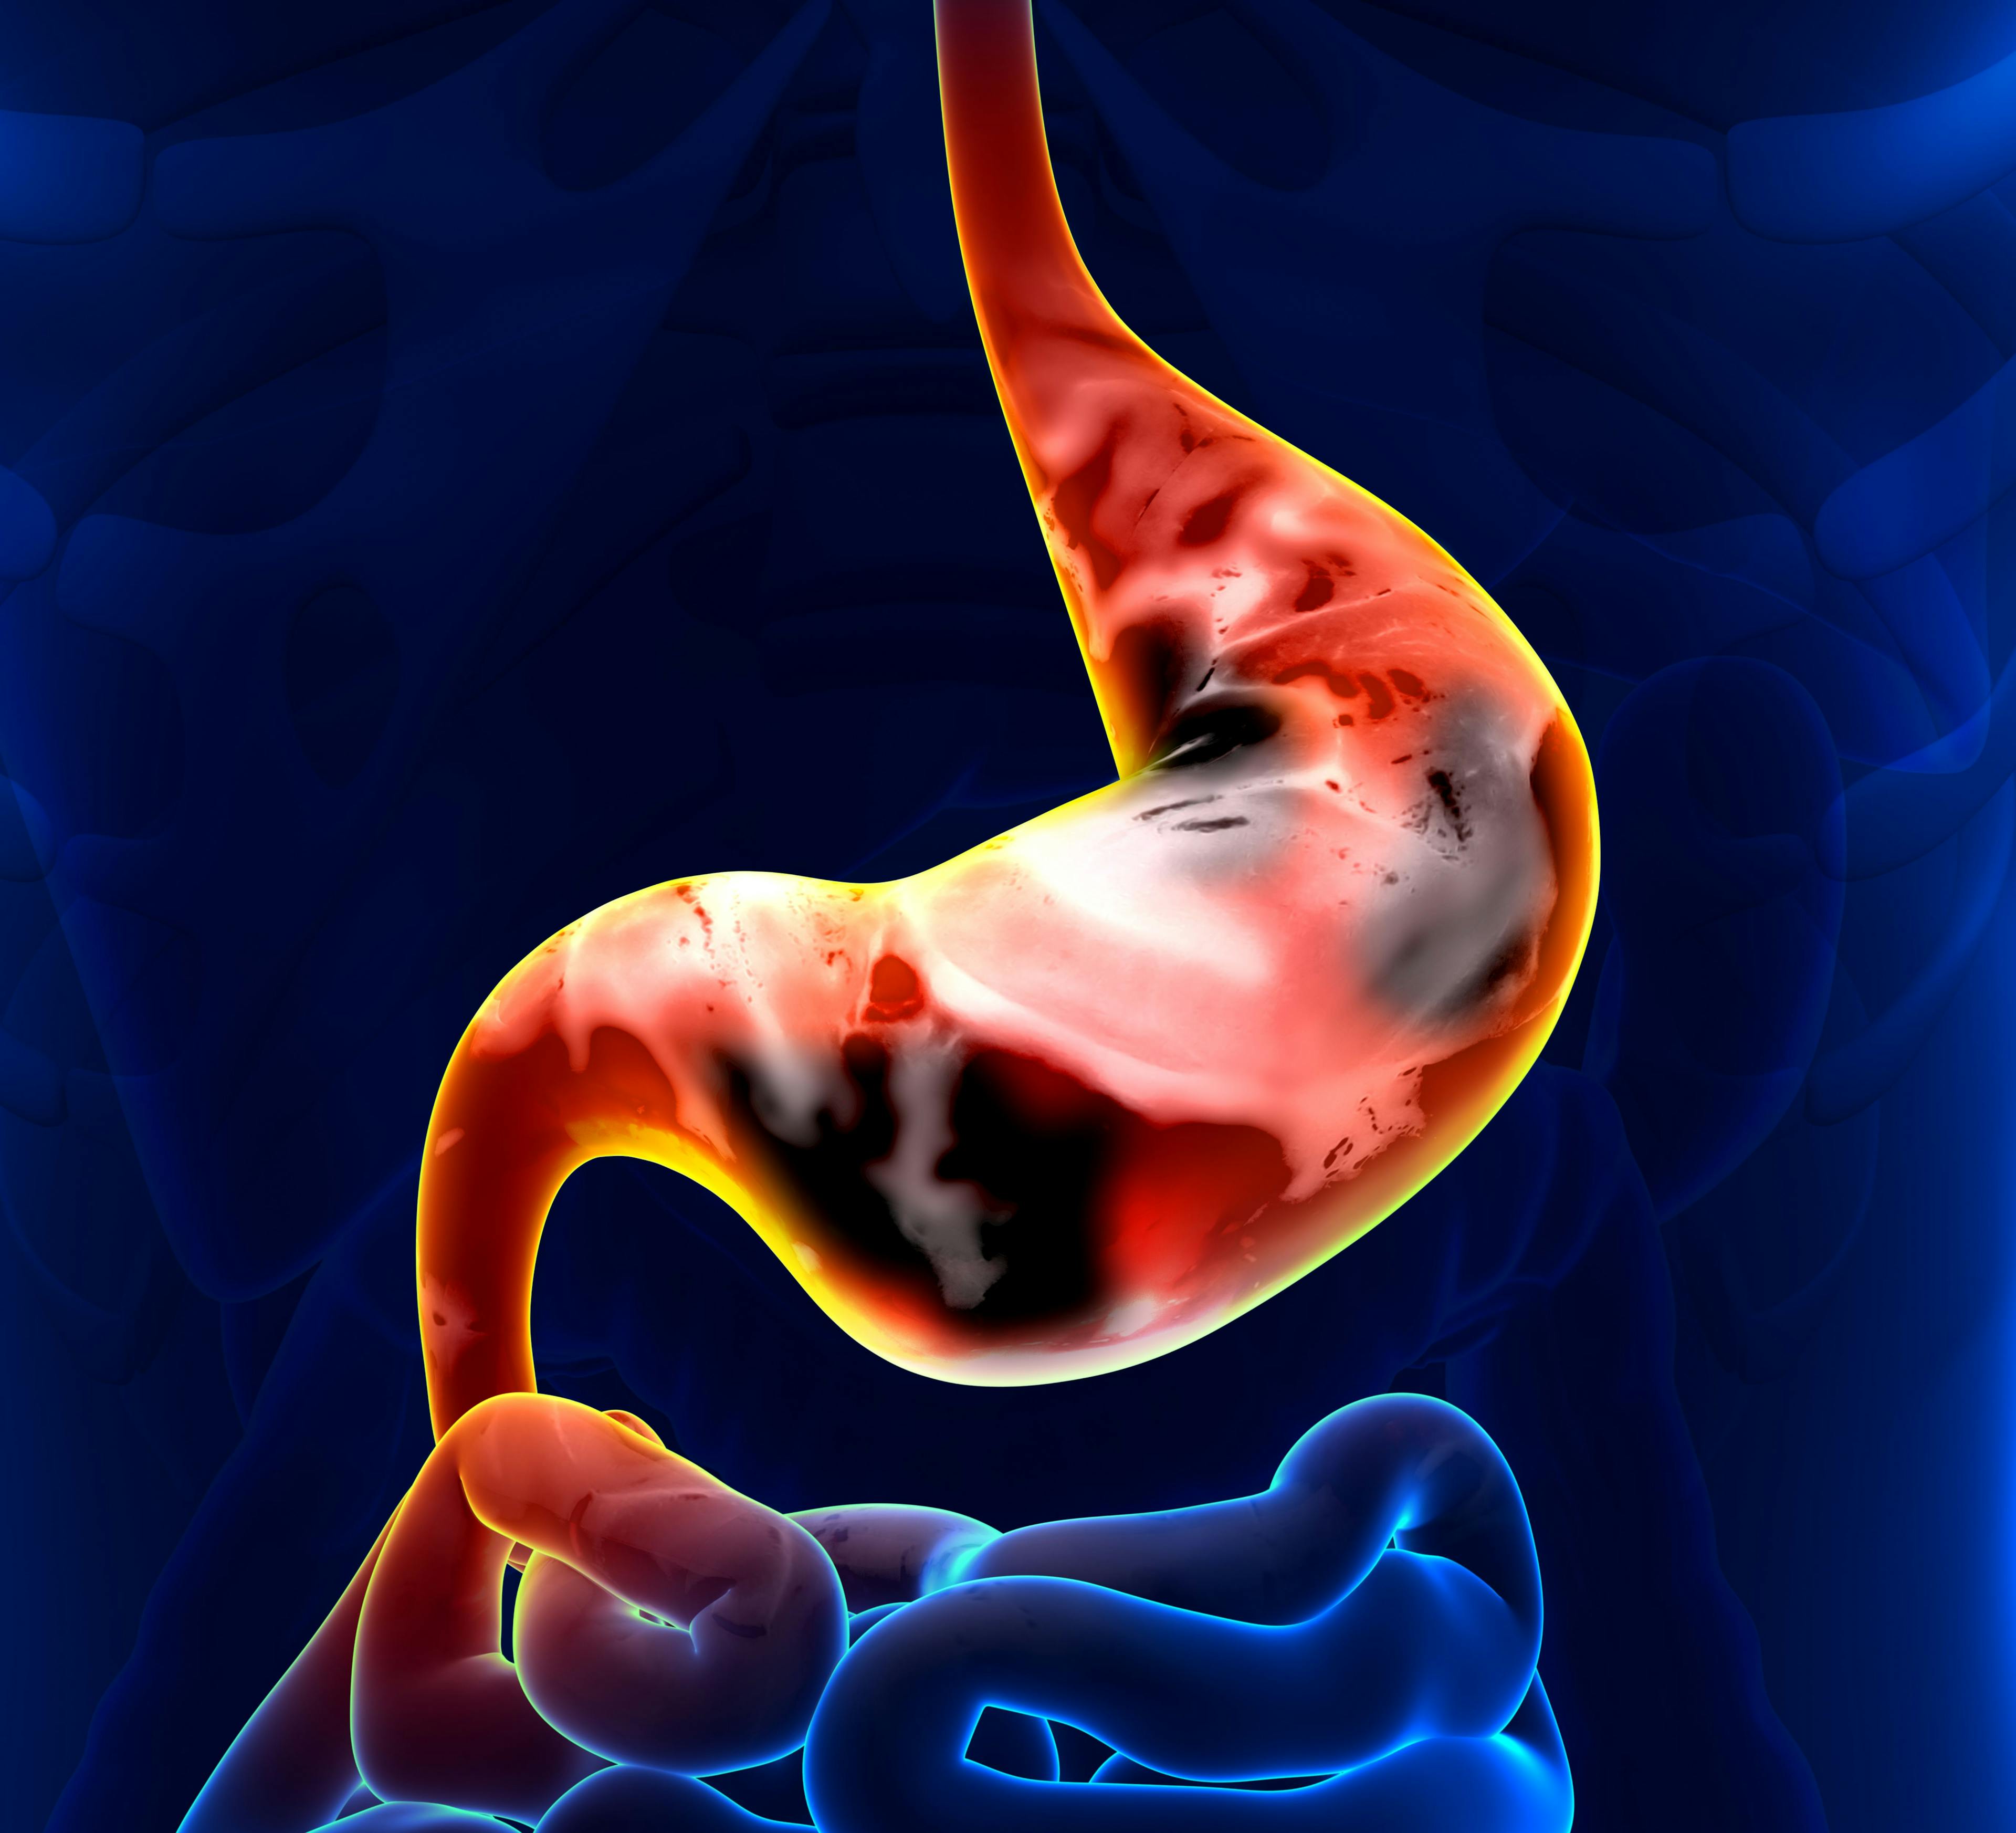 Trial Evaluating Nivolumab for Patients with Esophageal Cancer Meets Primary End Point of DFS